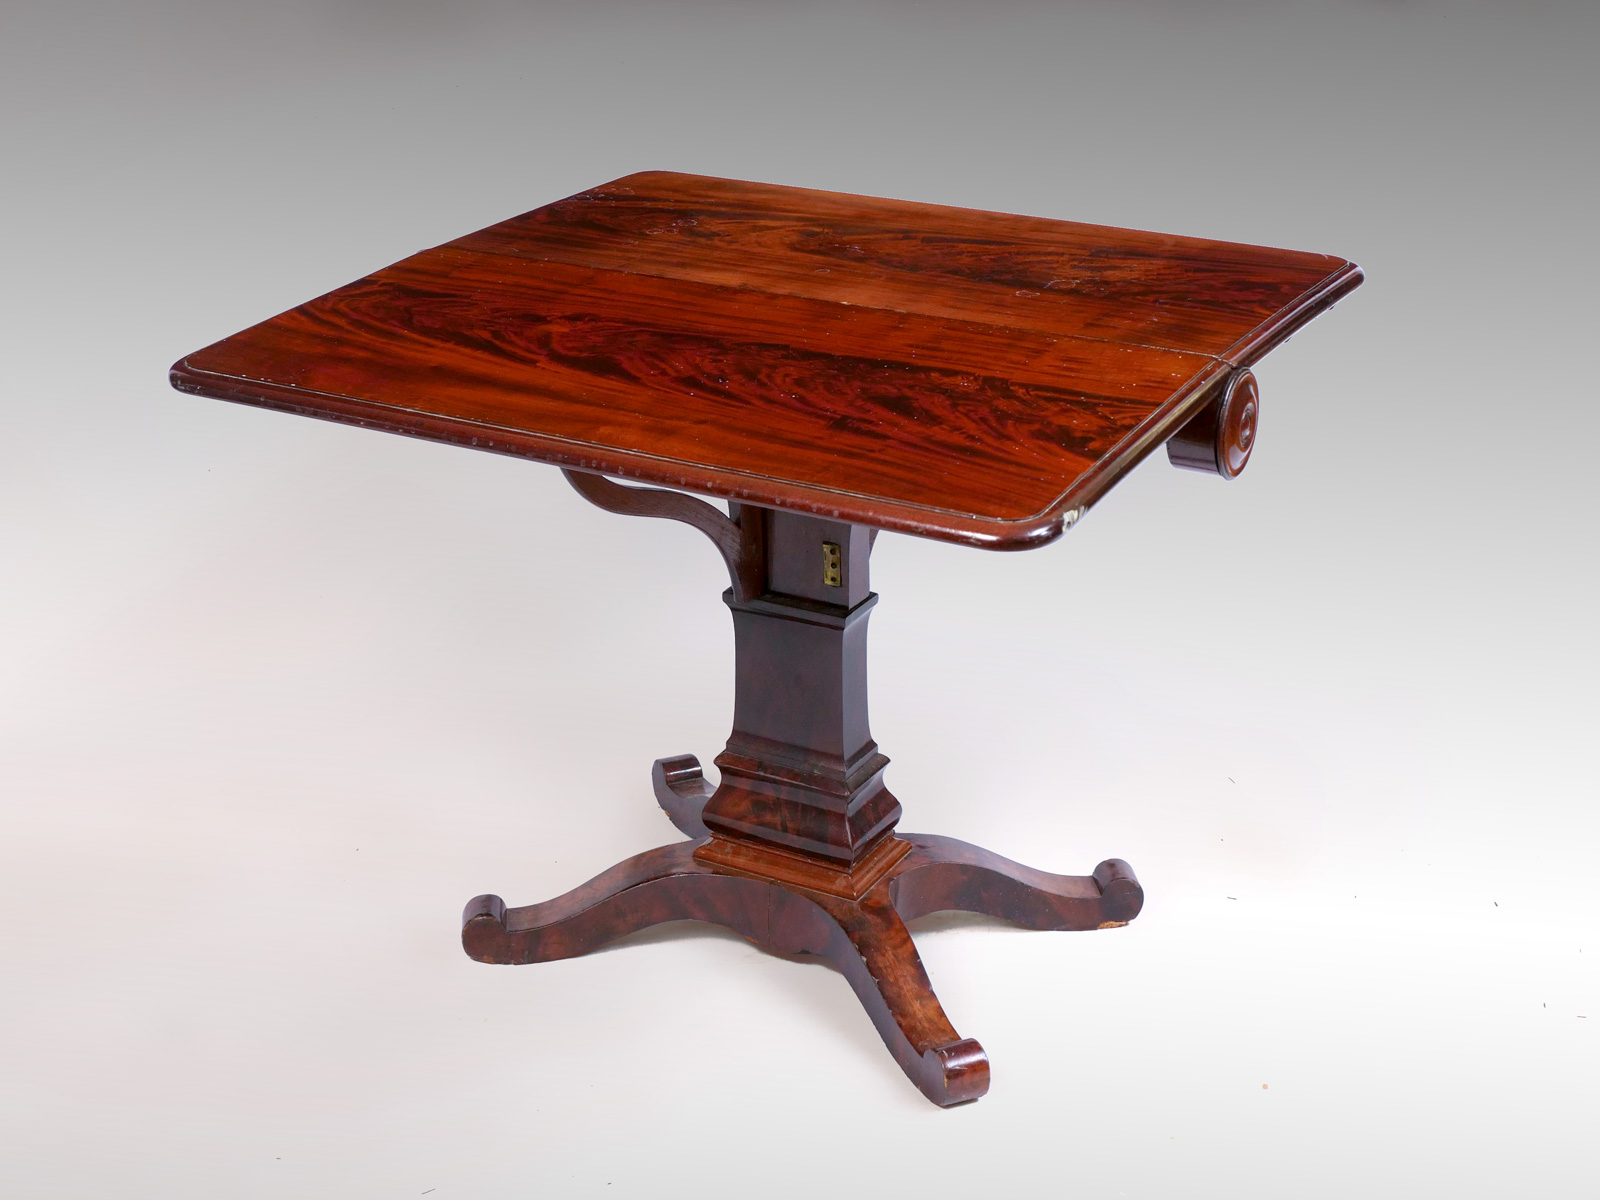 LATE EMPIRE DROP LEAF TABLE: Double